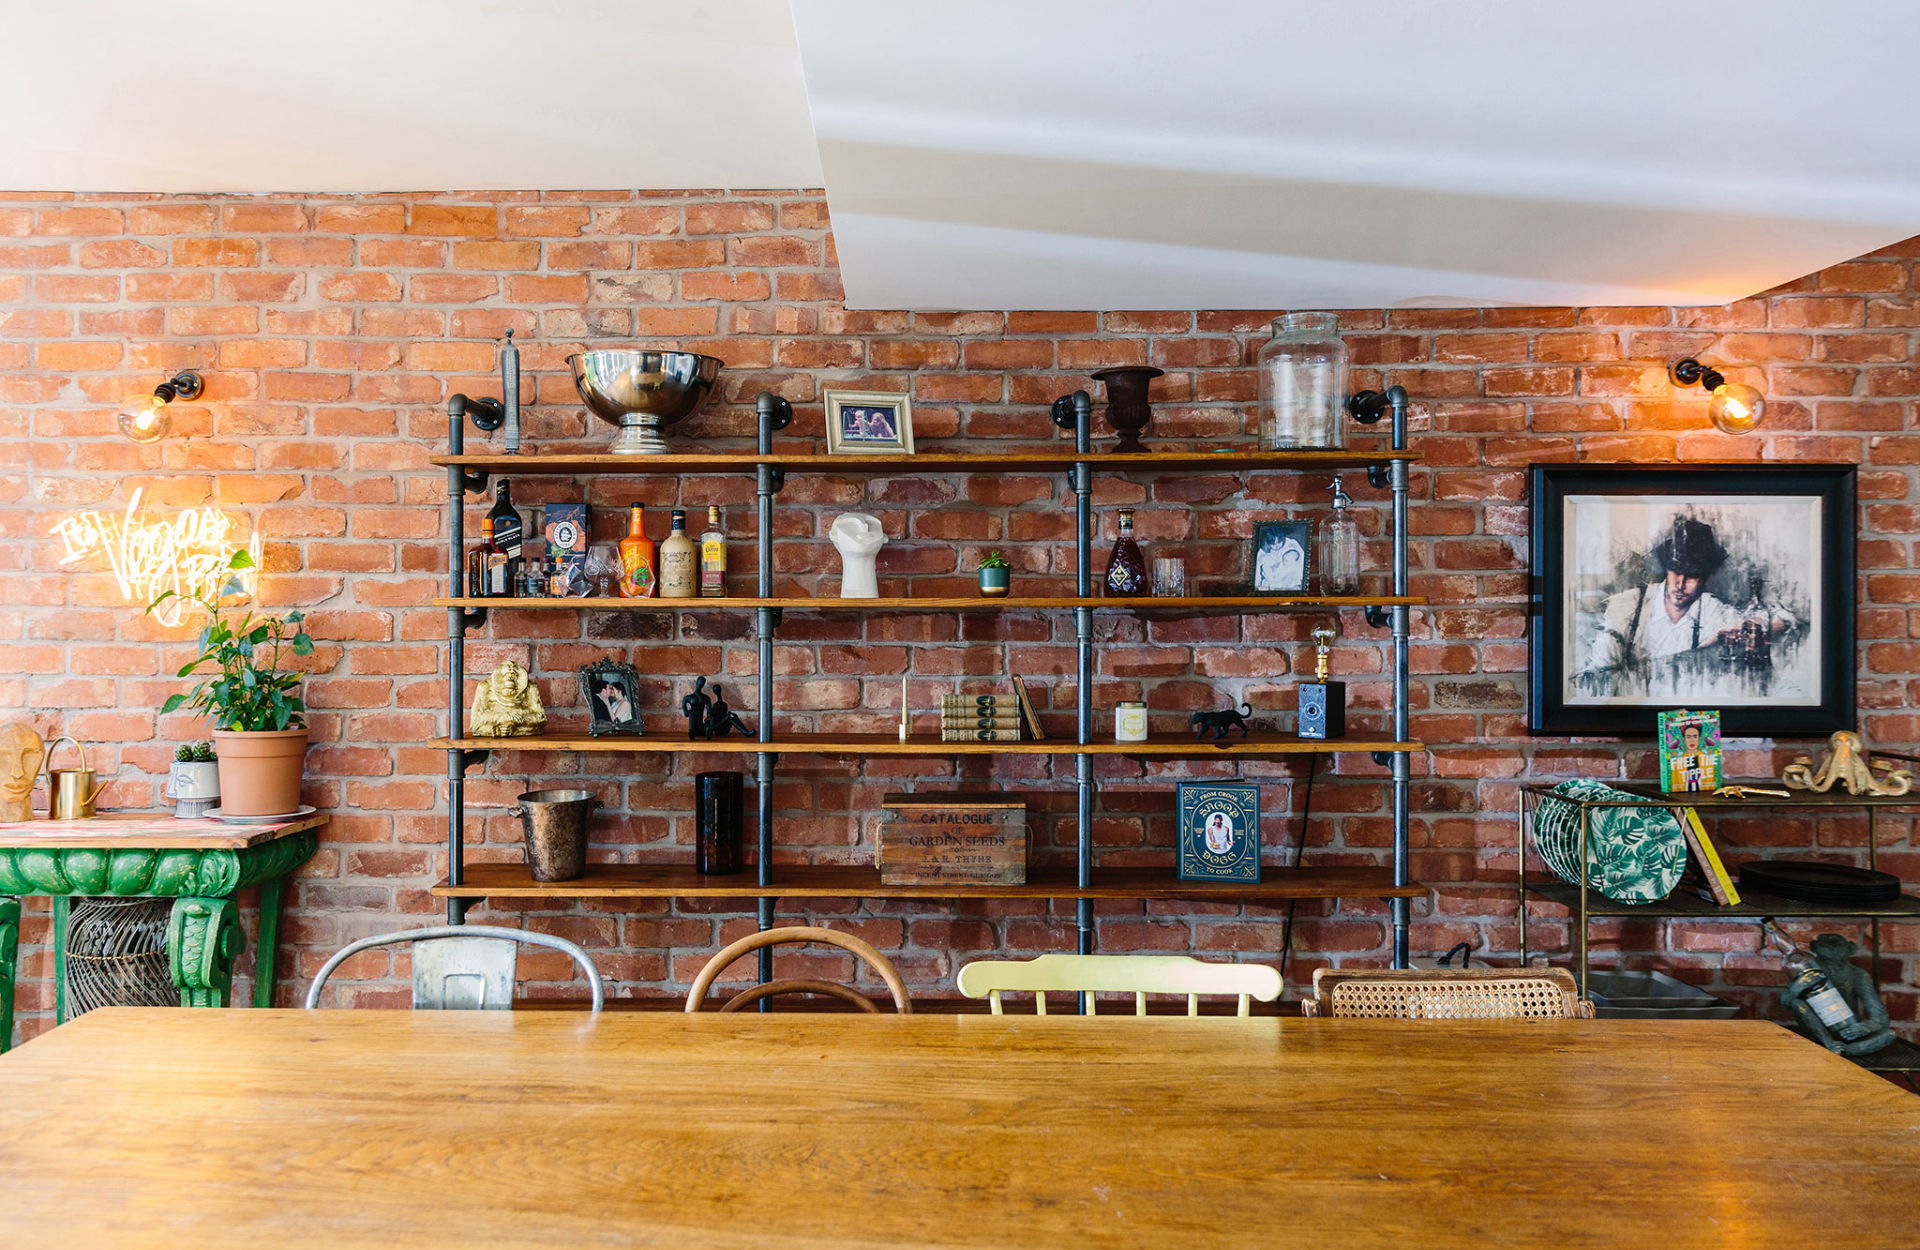 Shelves with various knick knacks infront of an exposed brick wall